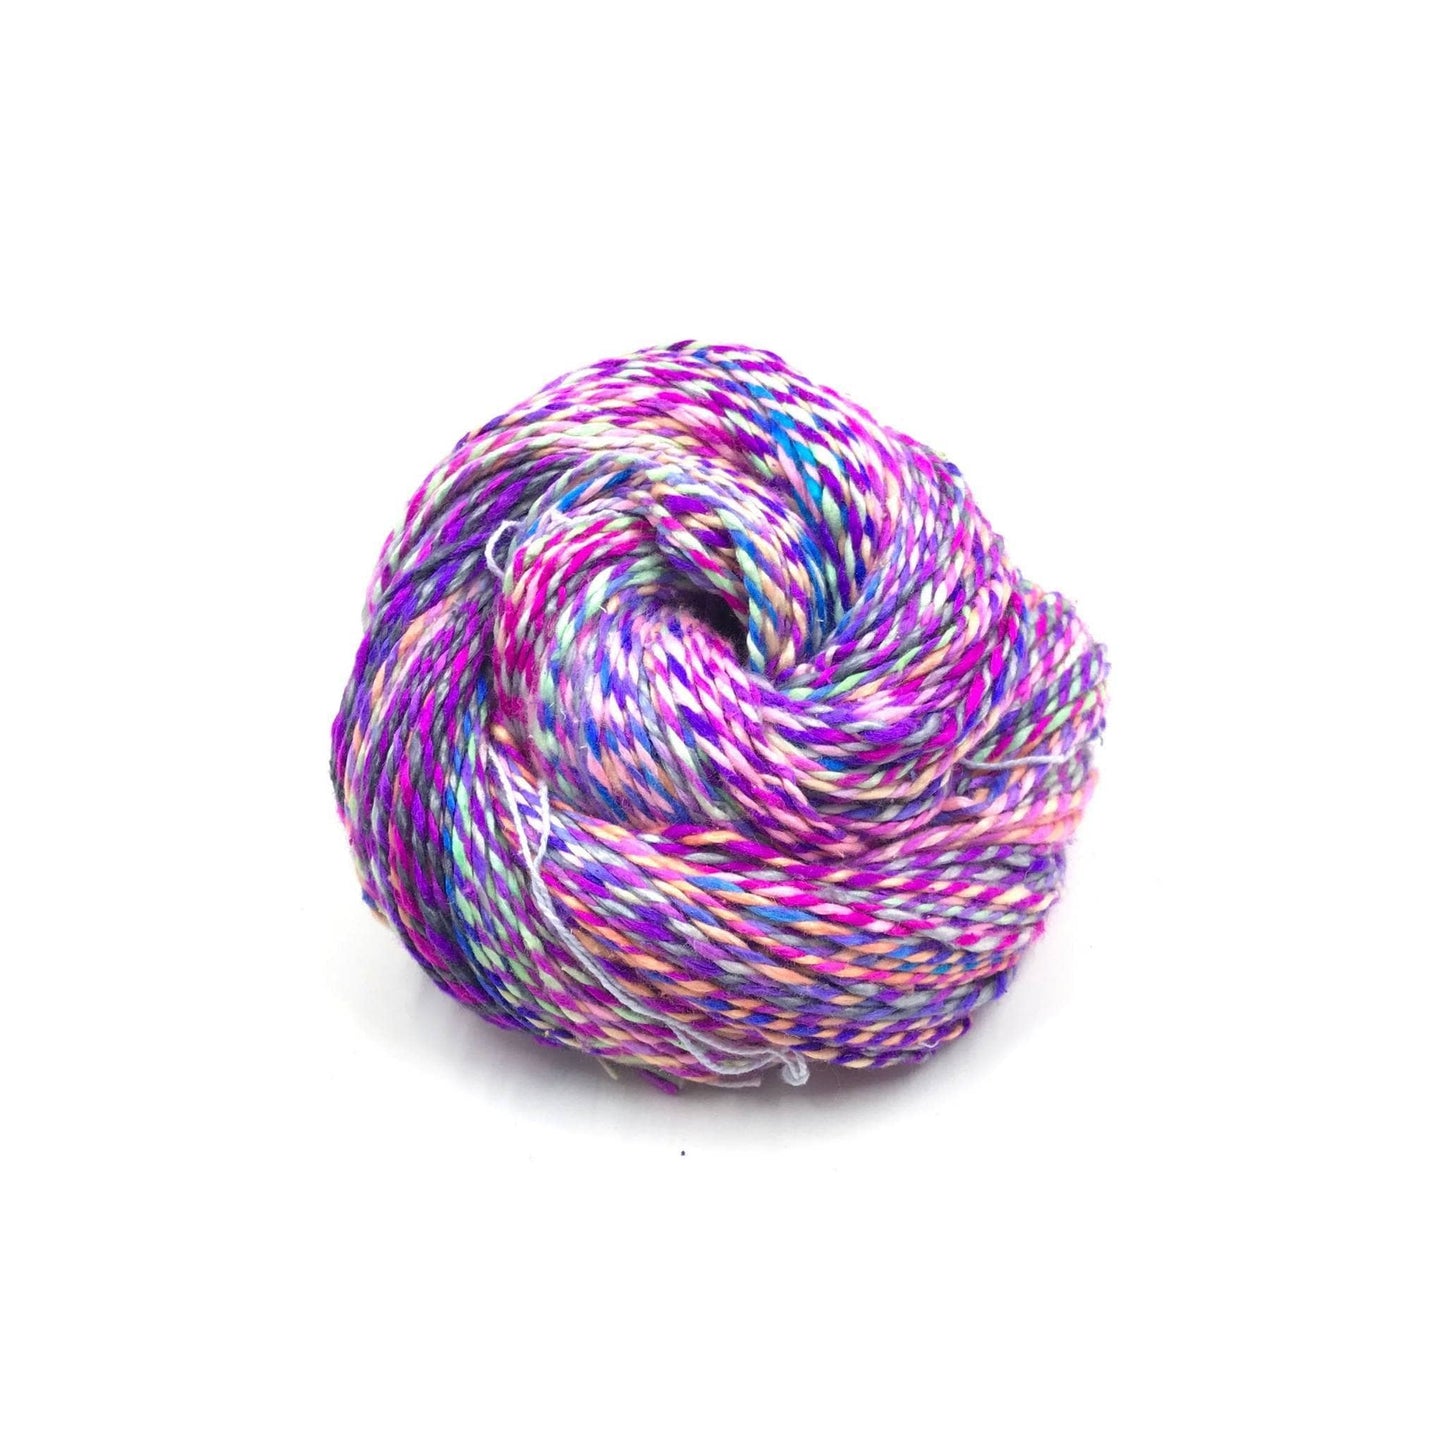 ball of sport weight silk in color way fancy flamingo. Pink, Purple , and light blue marled yarn in front of a white background